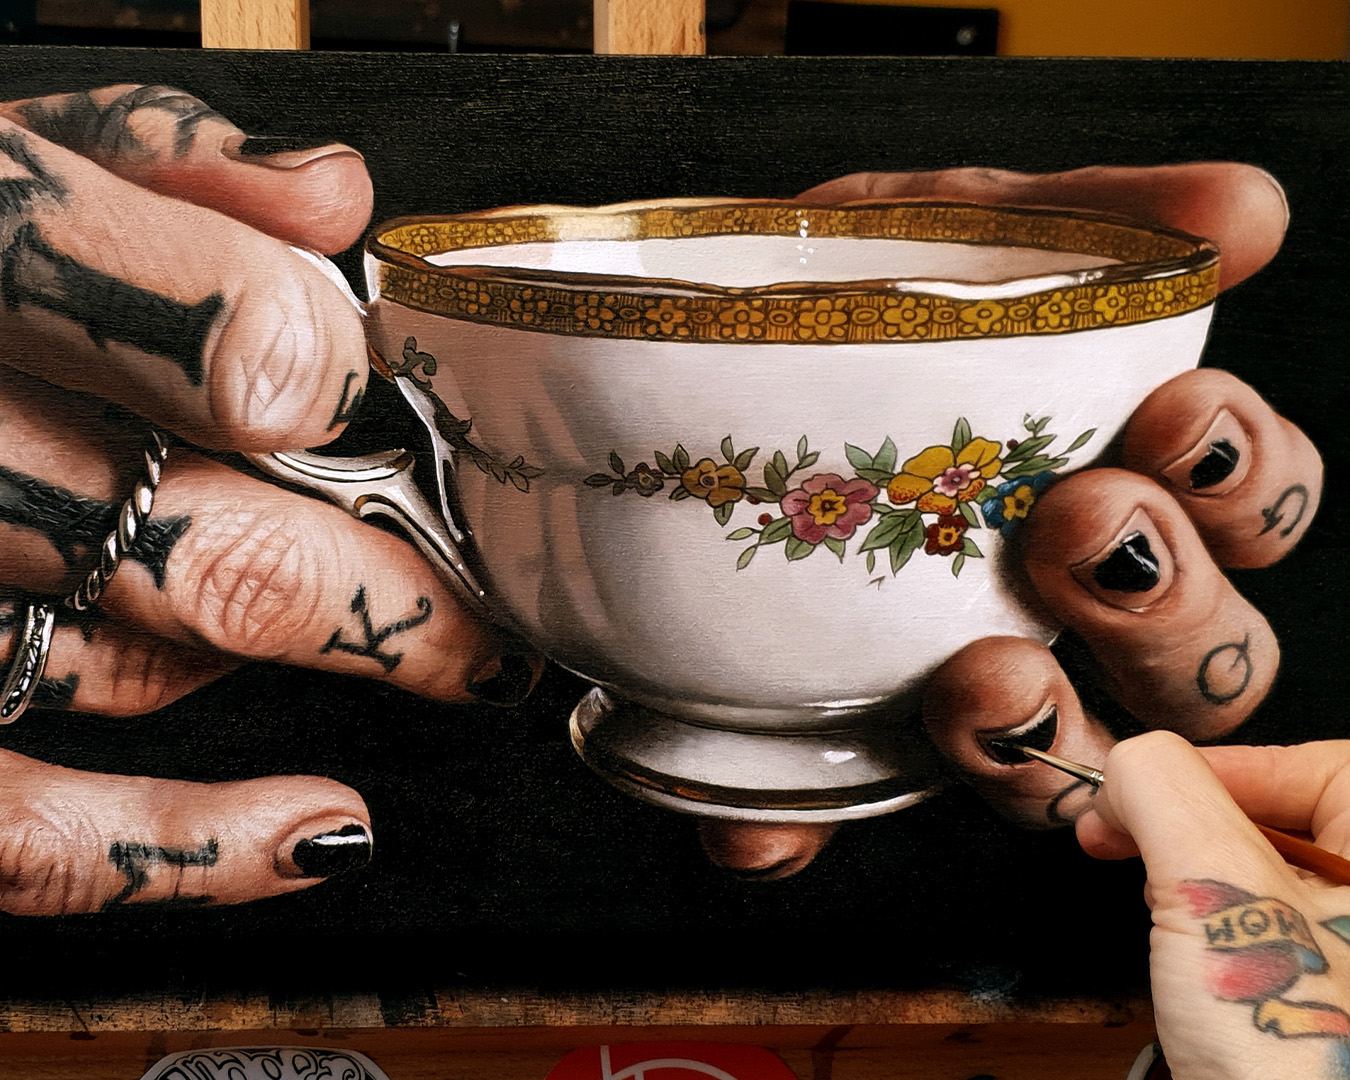 Jackee Sandelands acrylic painting hyper realistic hand and teacup